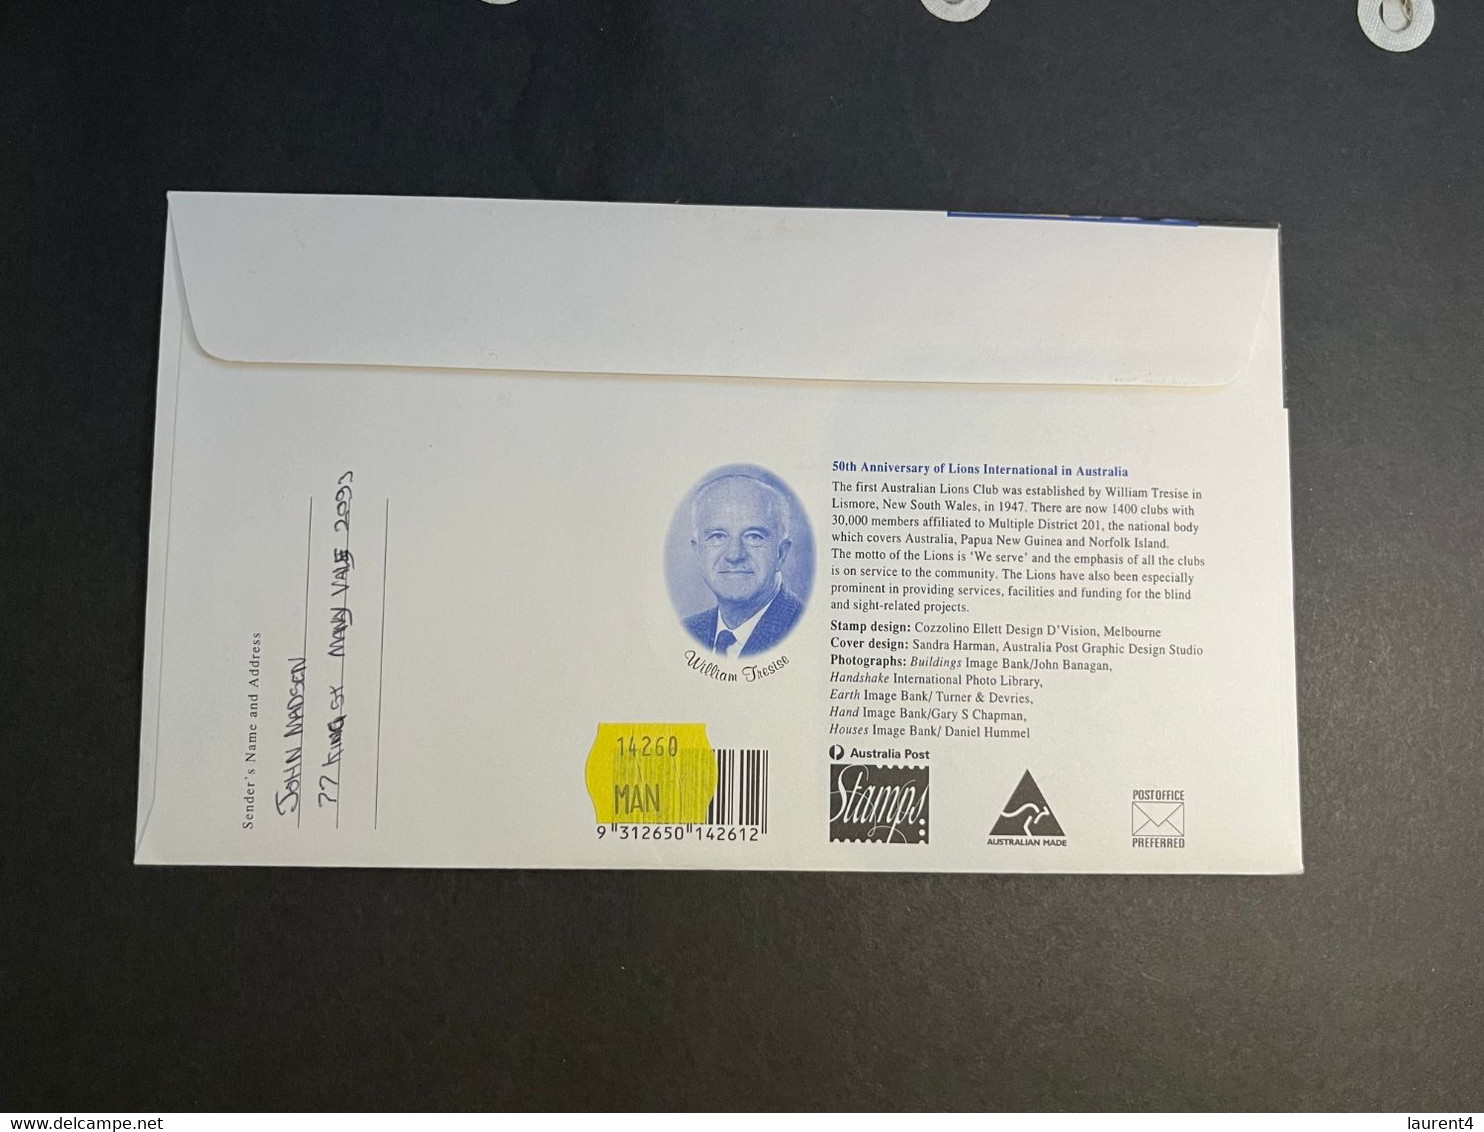 (3 N 35 B) Australia - Underpaid Letter (TAXED) No Stamp Used On Cover (Lions 50th Anniversary FDC Cover) - Errors, Freaks & Oddities (EFO)